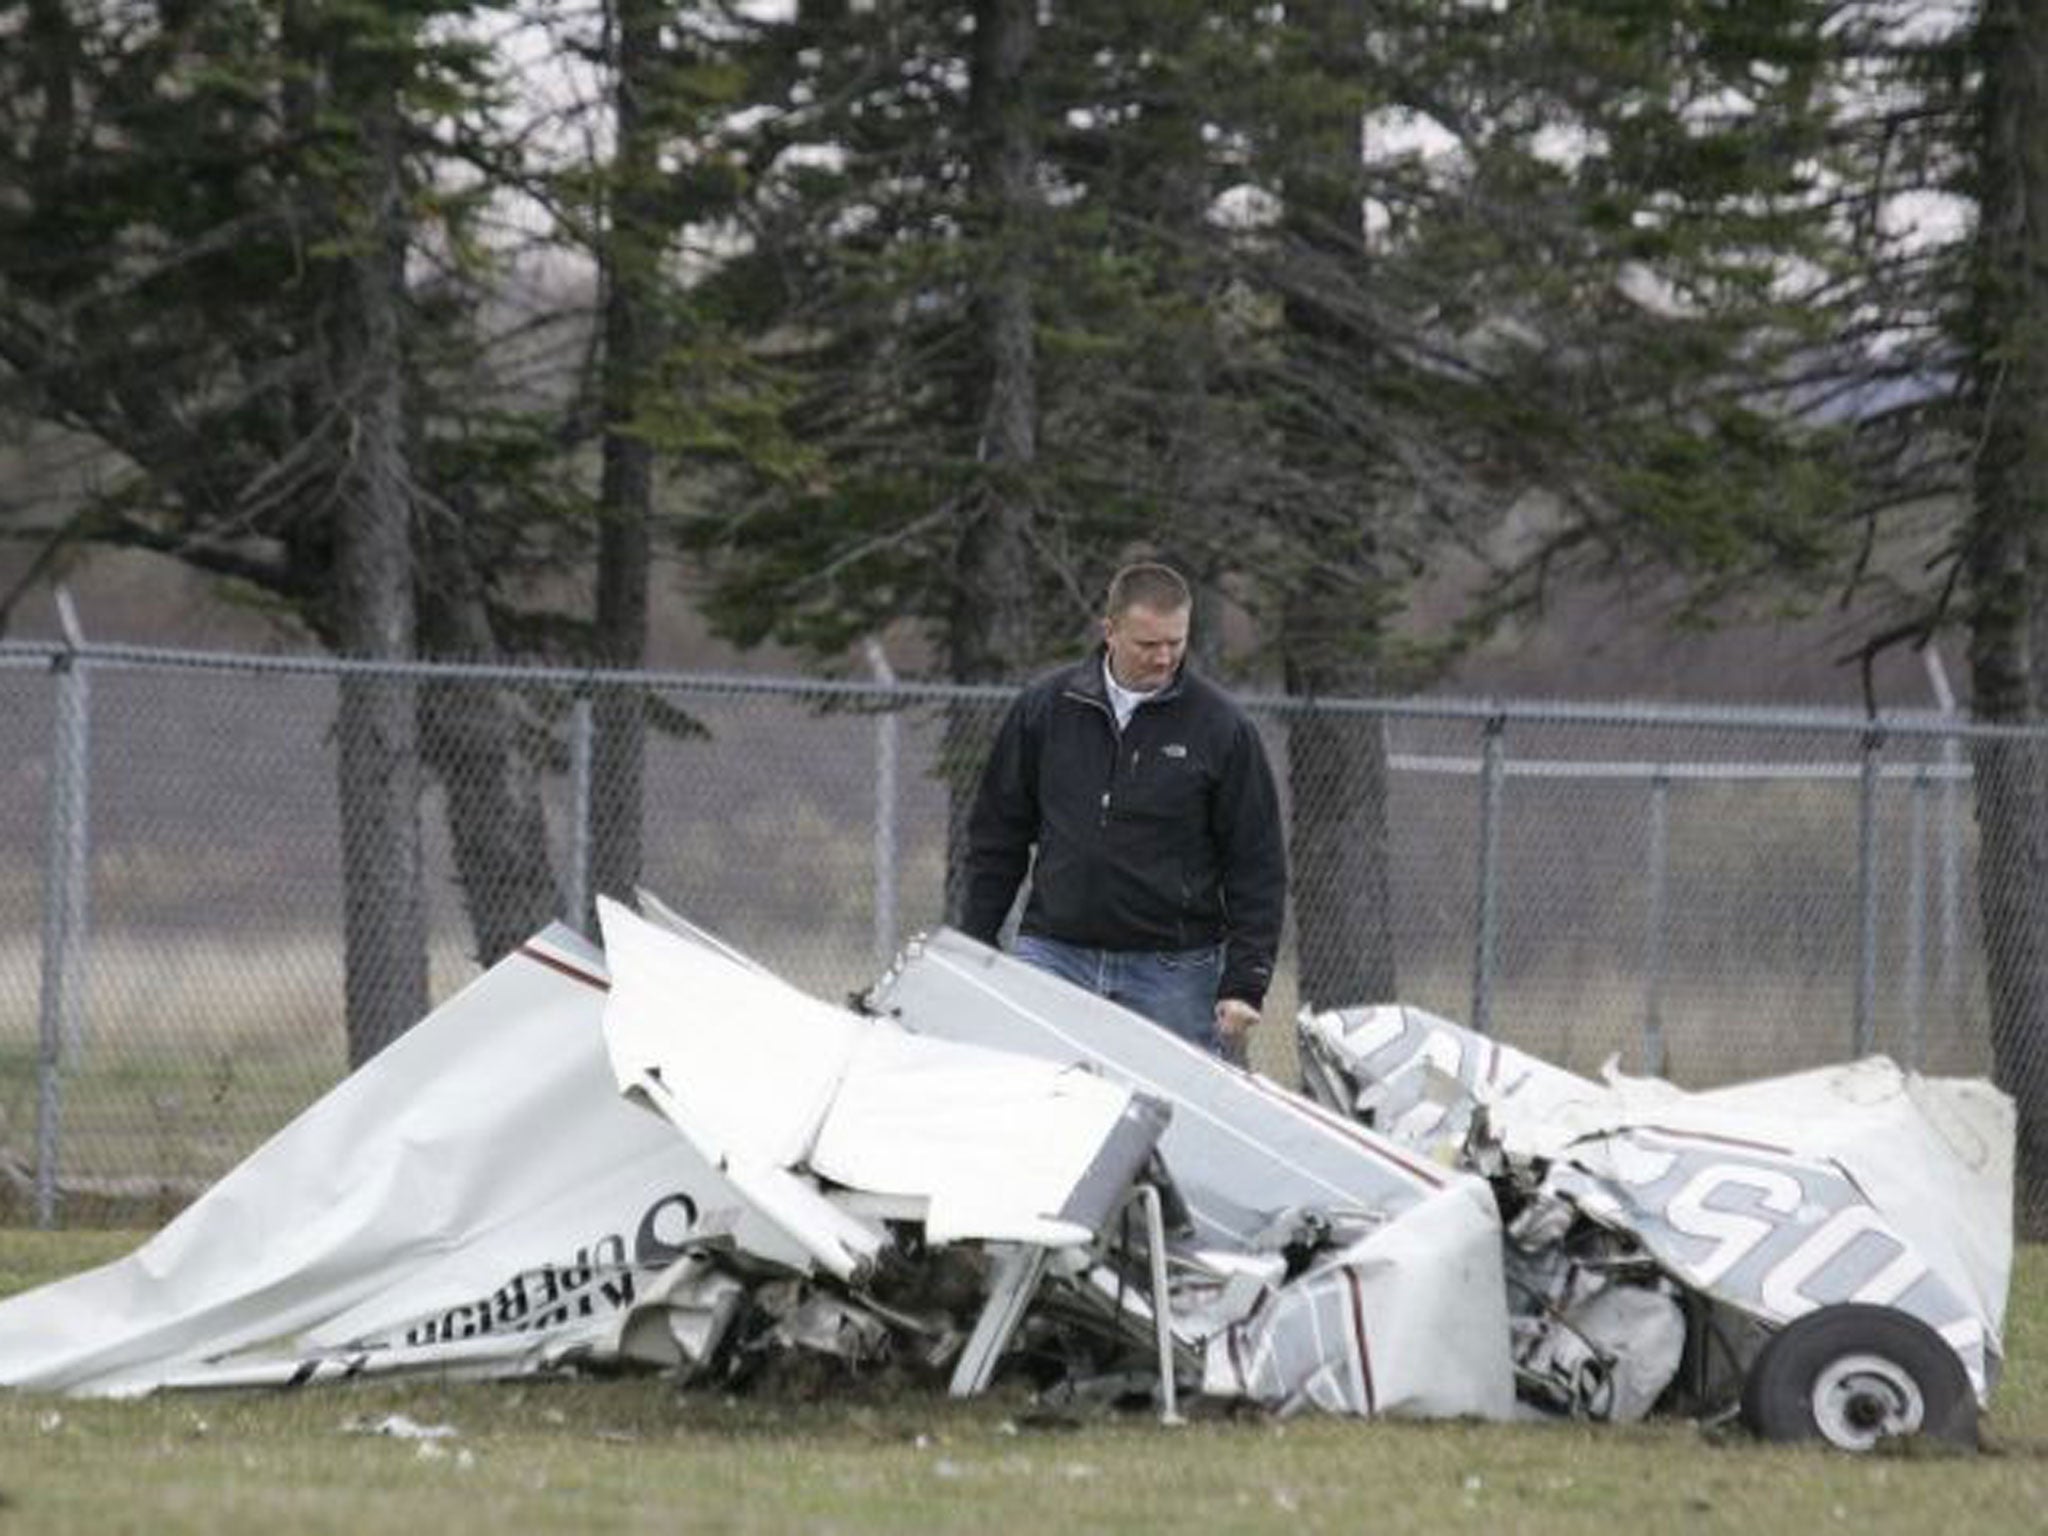 An FAA investigator examines the wreckage of a plane that crashed in Superior, Wis., after a midair collision with another plane